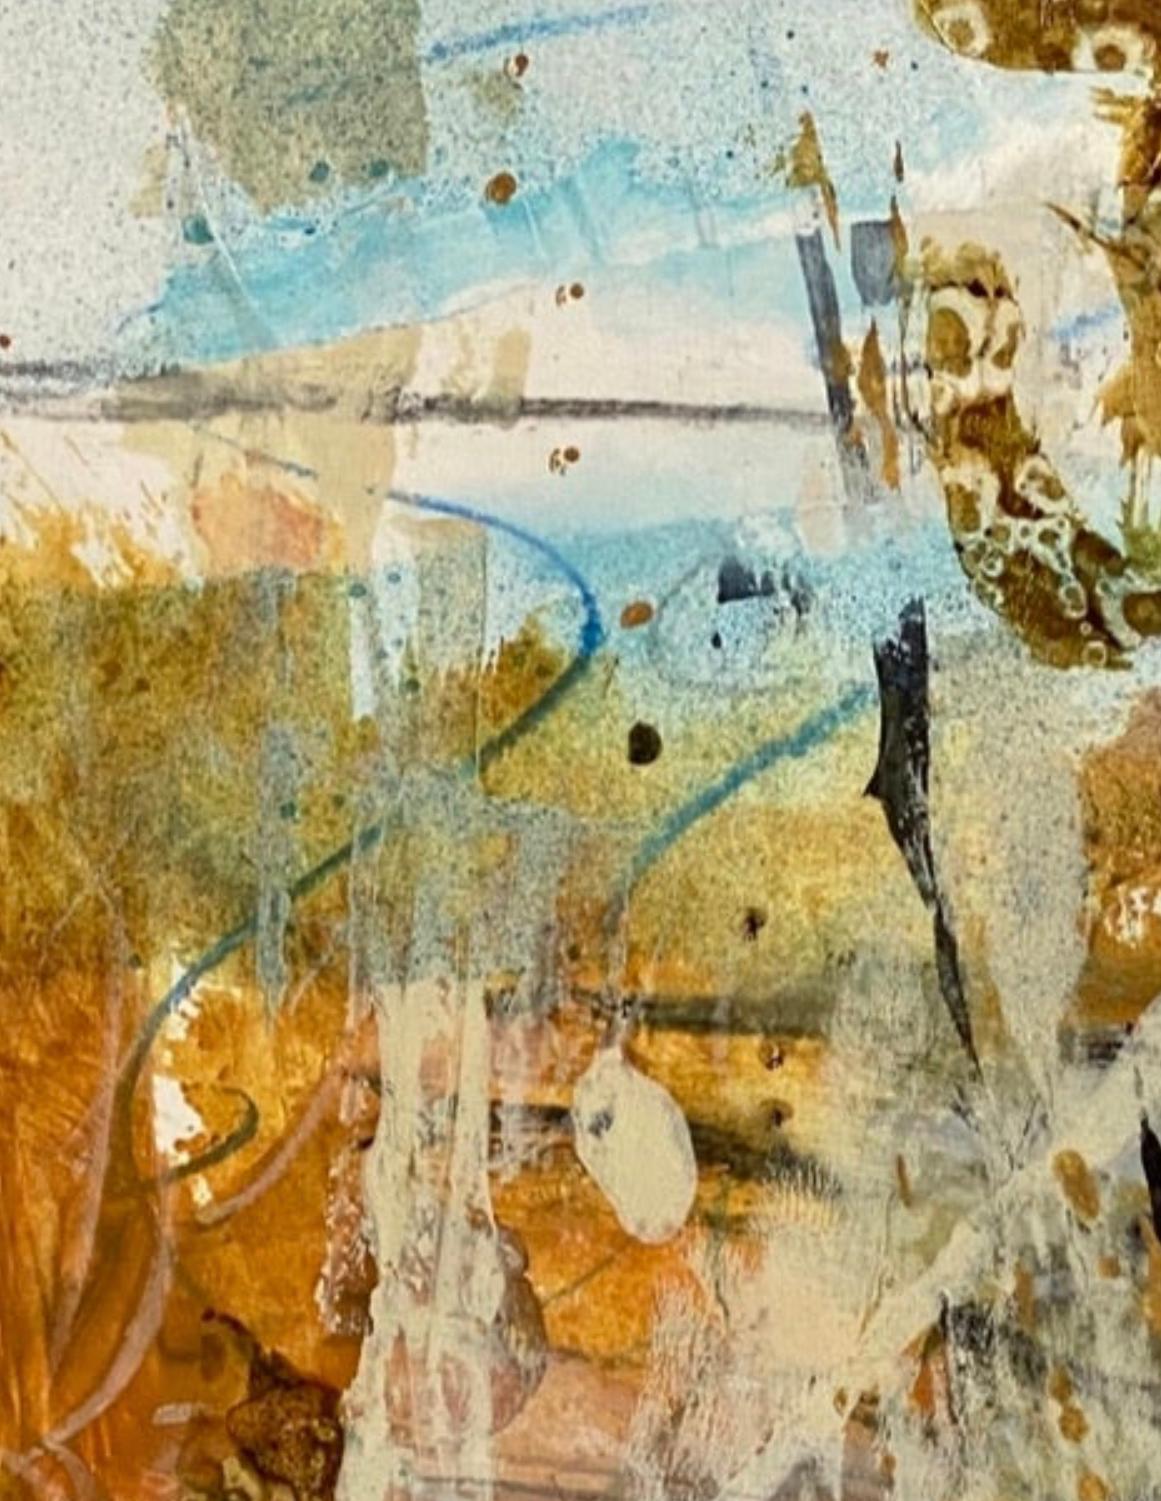 Aesthetic connection, Contemporary abstract, neutral, warm, sienna, on paper - Painting by Juanita Bellavance 